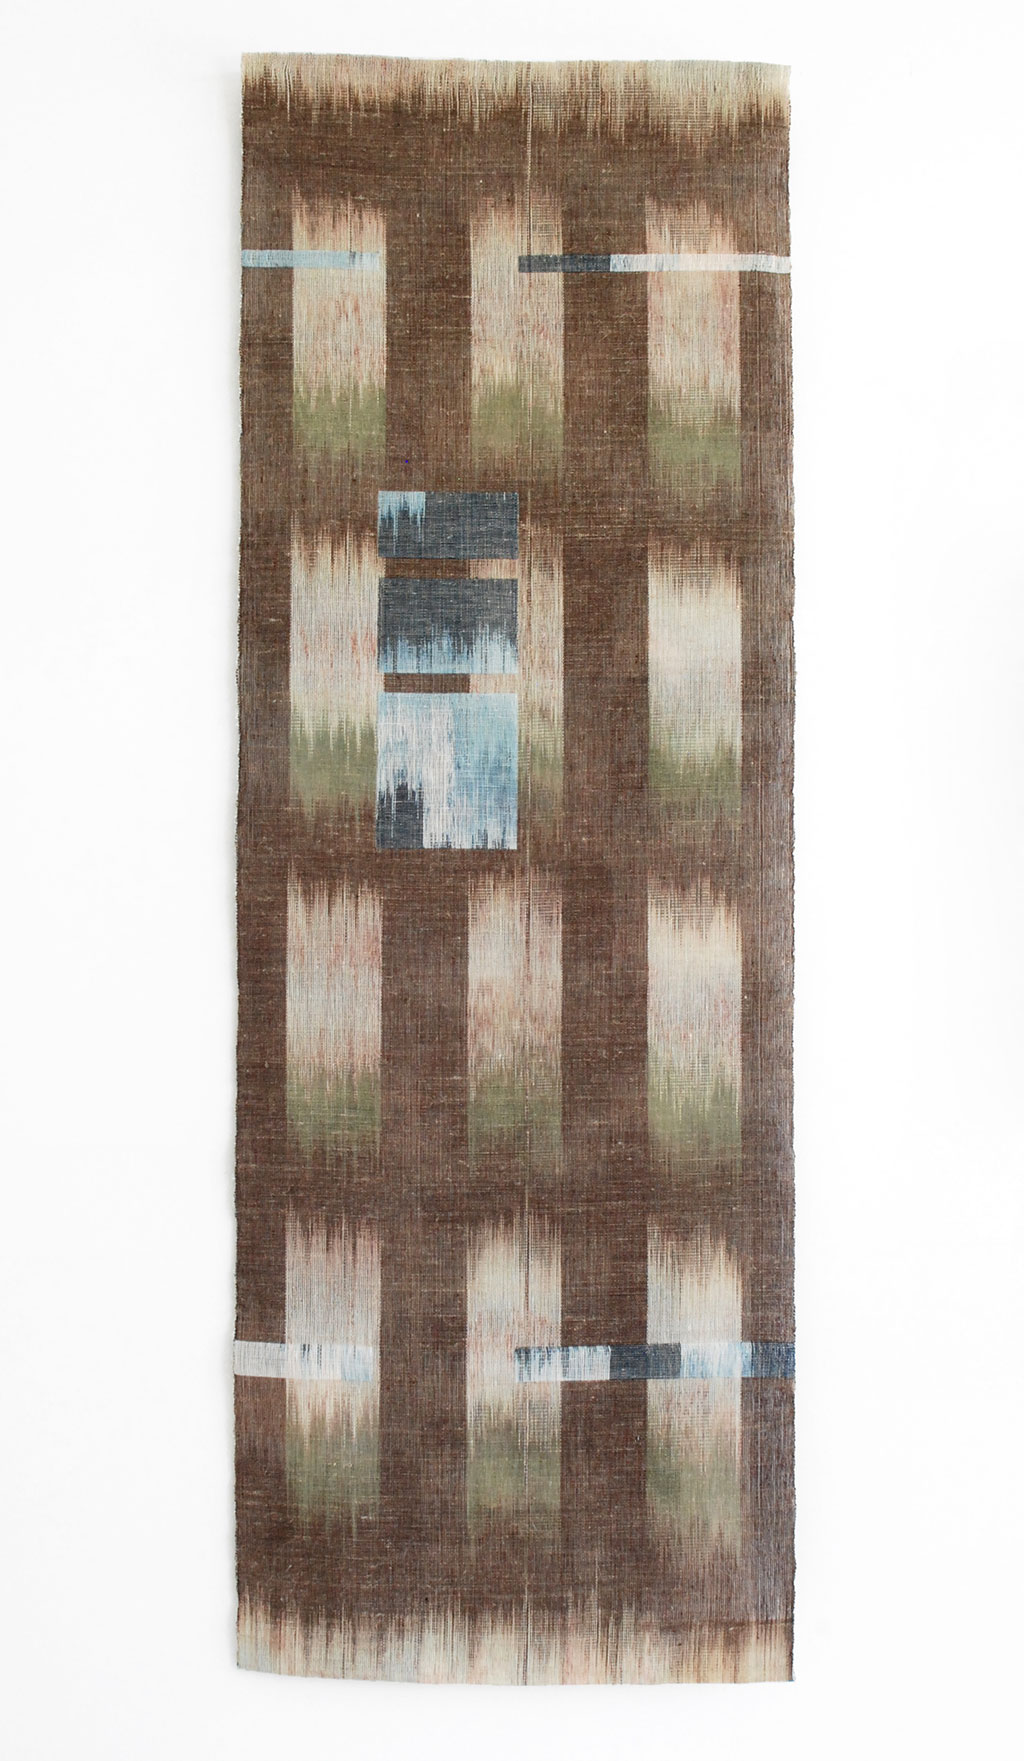 Marcia Weiss, Rhythm I, 2012. Material Meaning: A Living Legacy of Anni Albers, Craft in America